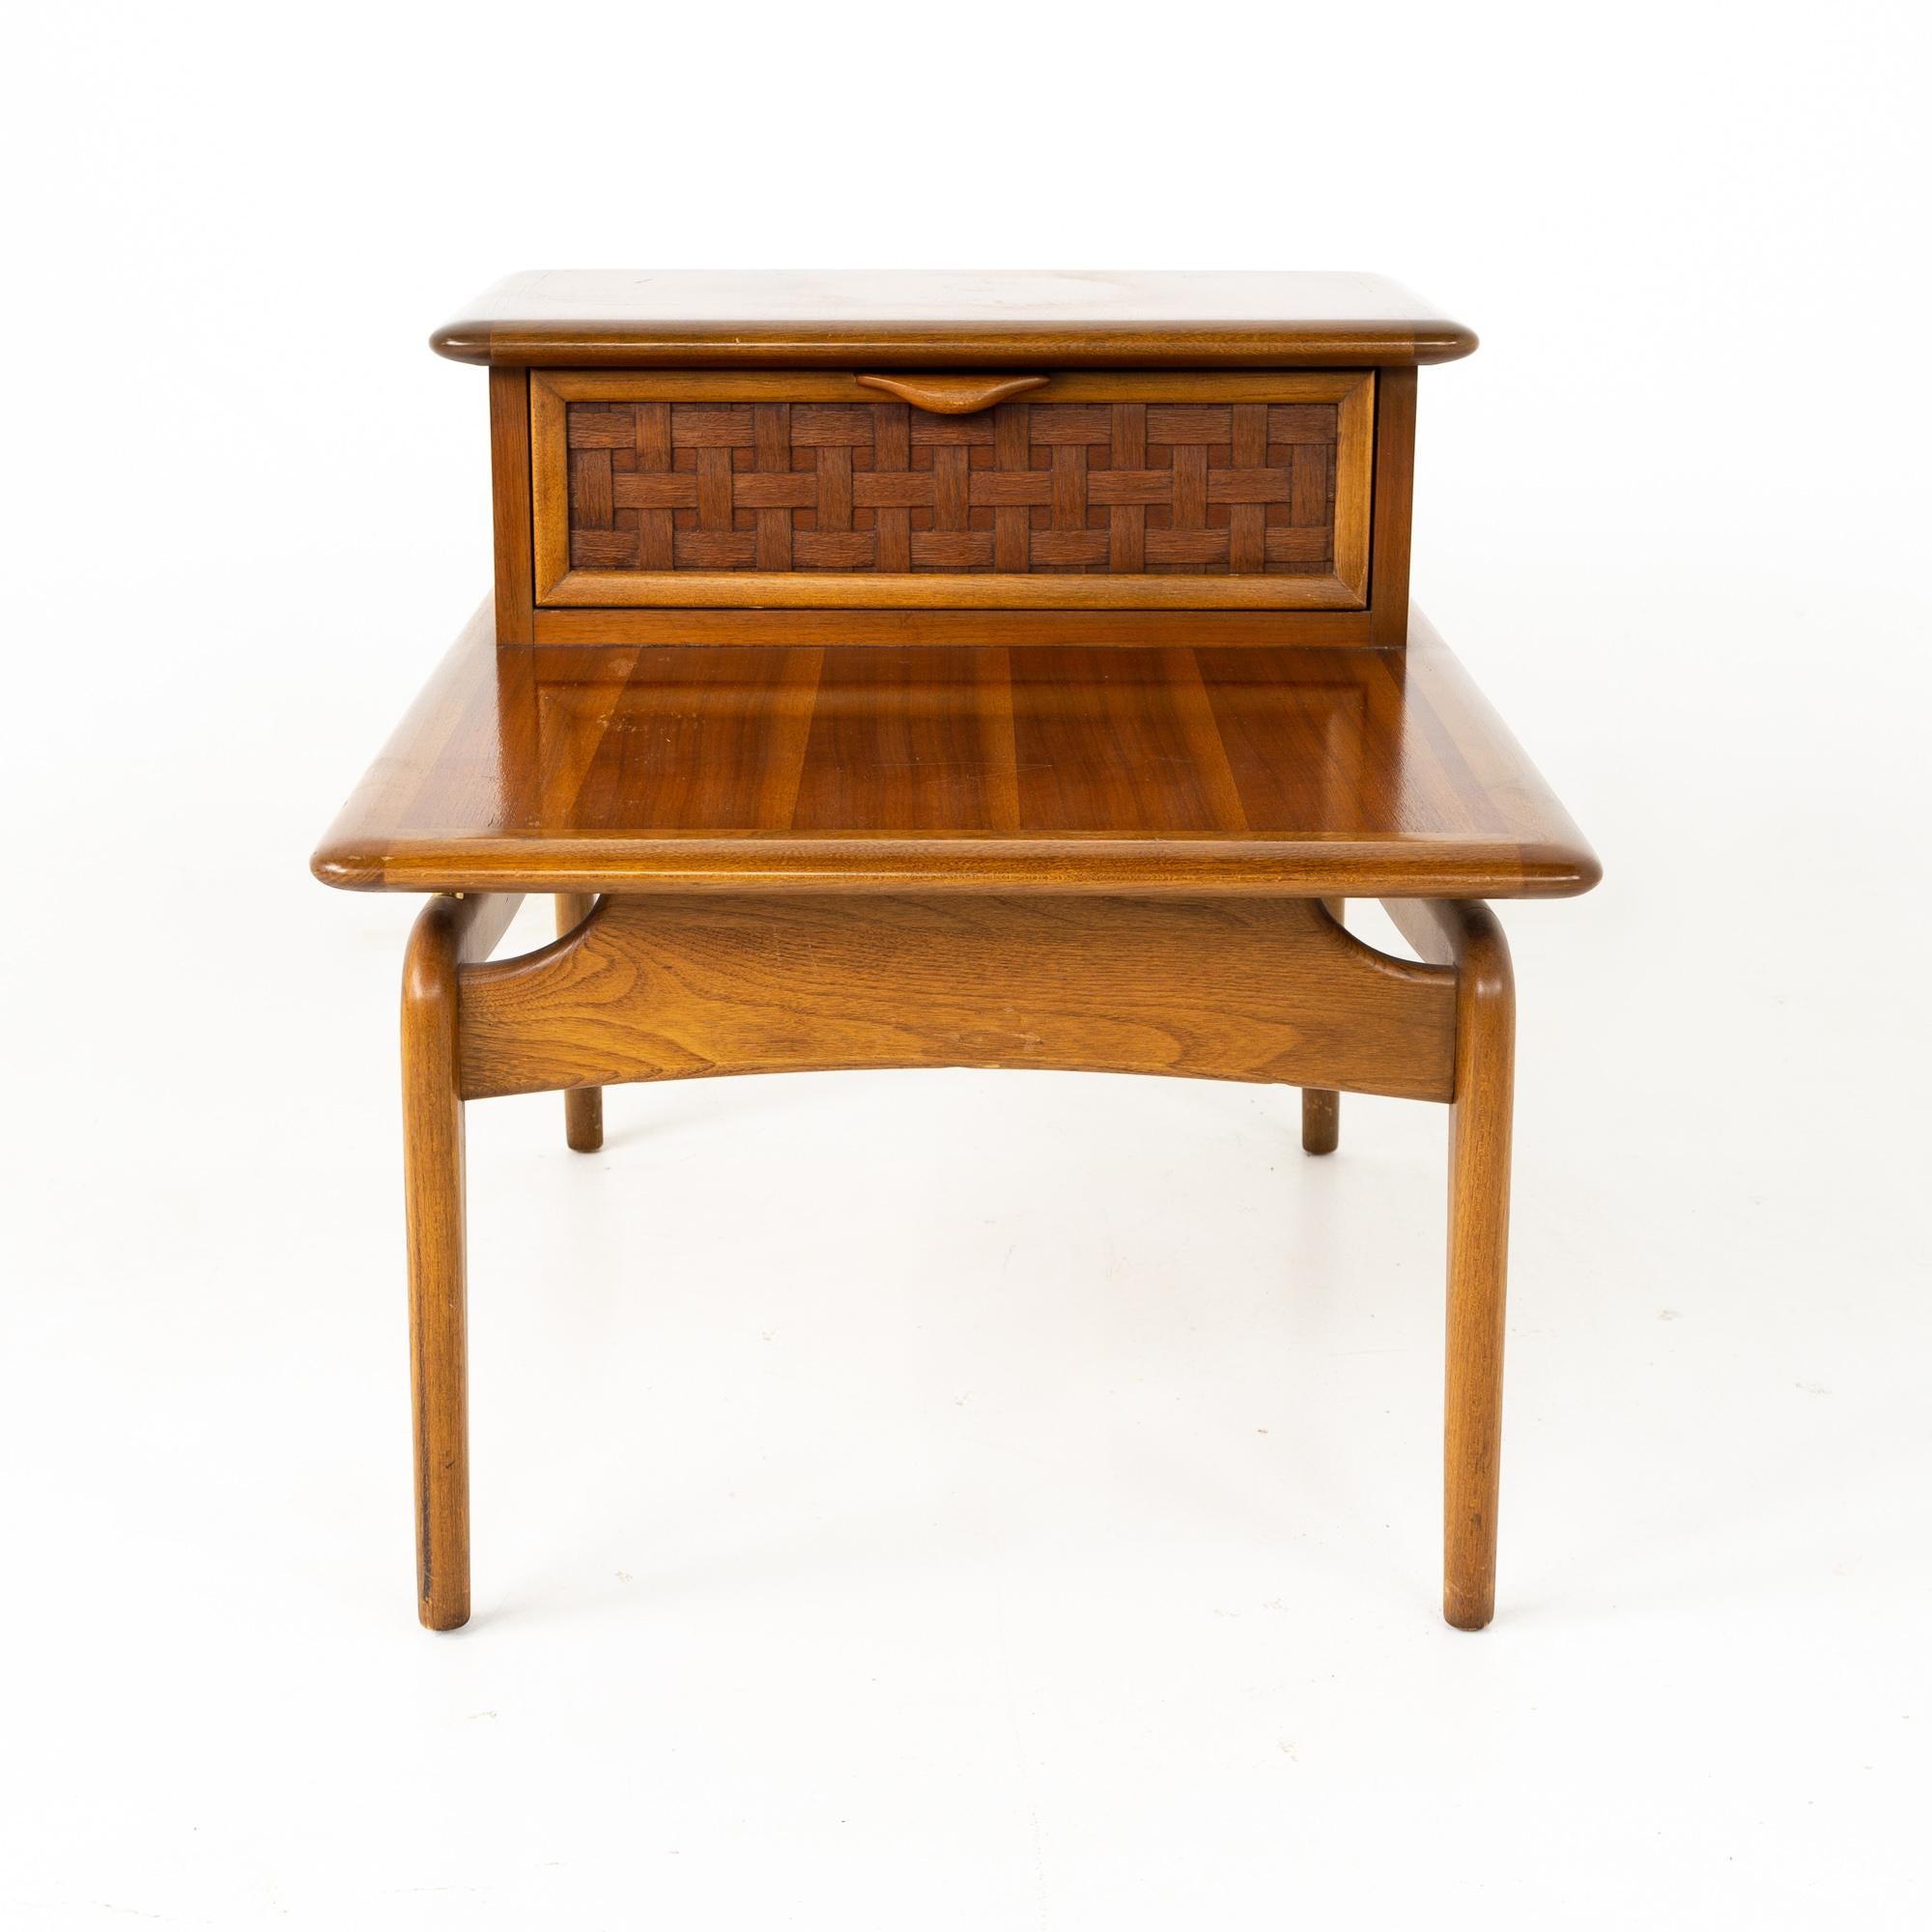 Lane Perception Mid Century Walnut Step Side Table
This table is 22.5 wide x 30 deep x 22 inches high

This price includes getting this piece in what we call Restored Vintage Condition. That means the piece is permanently fixed upon purchase so it’s